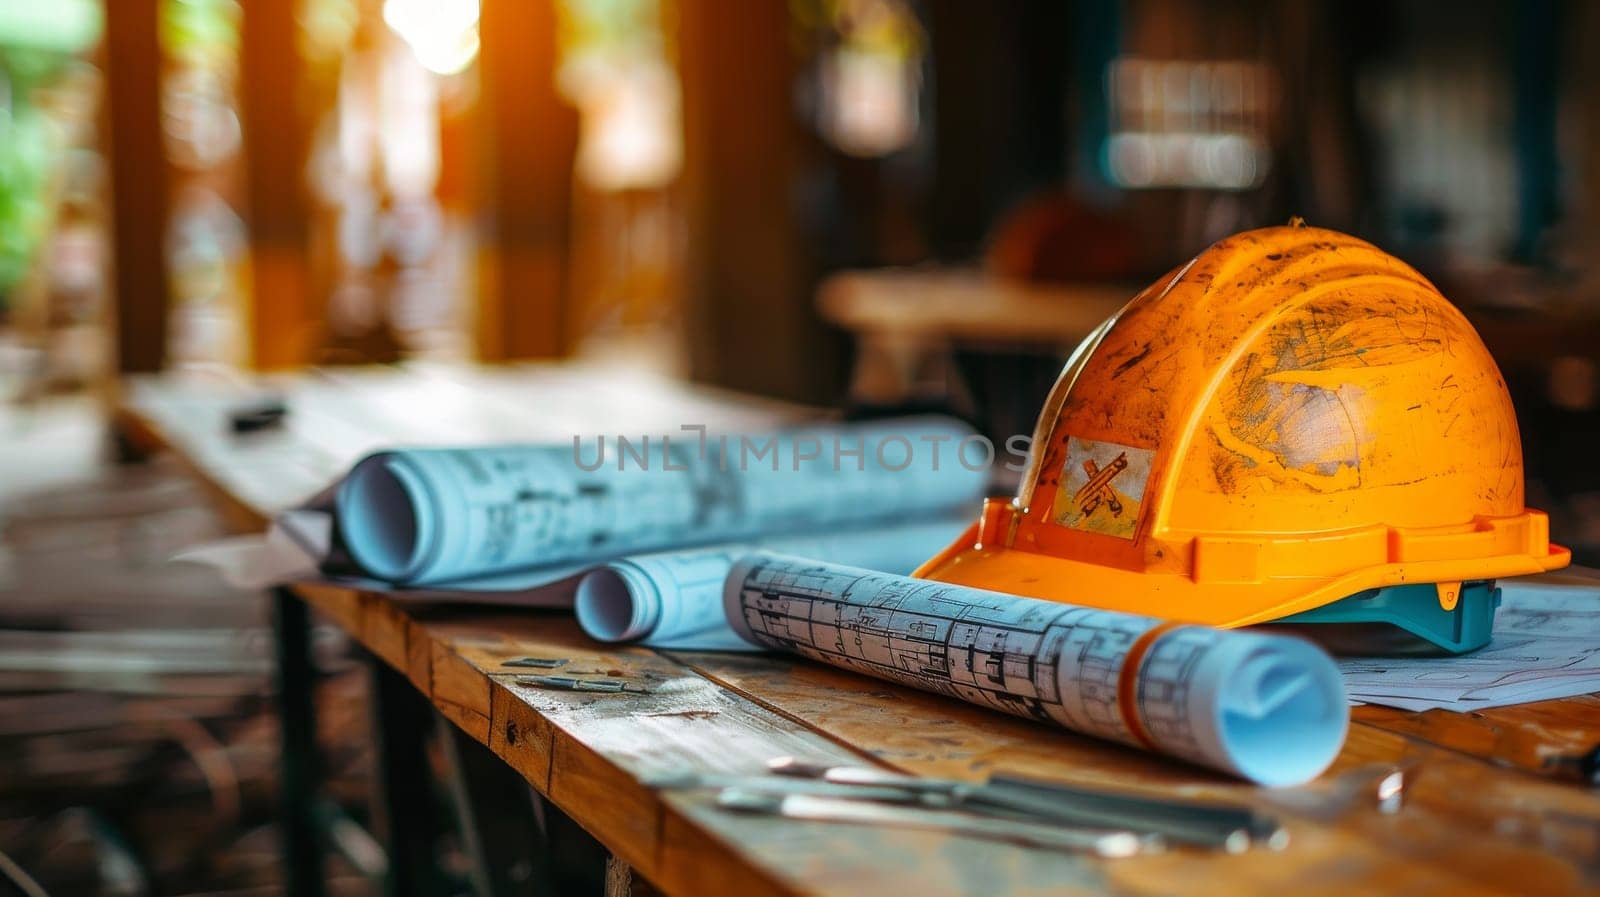 A construction site with a hard hat and blueprints on a table. Scene is serious and focused on the task at hand